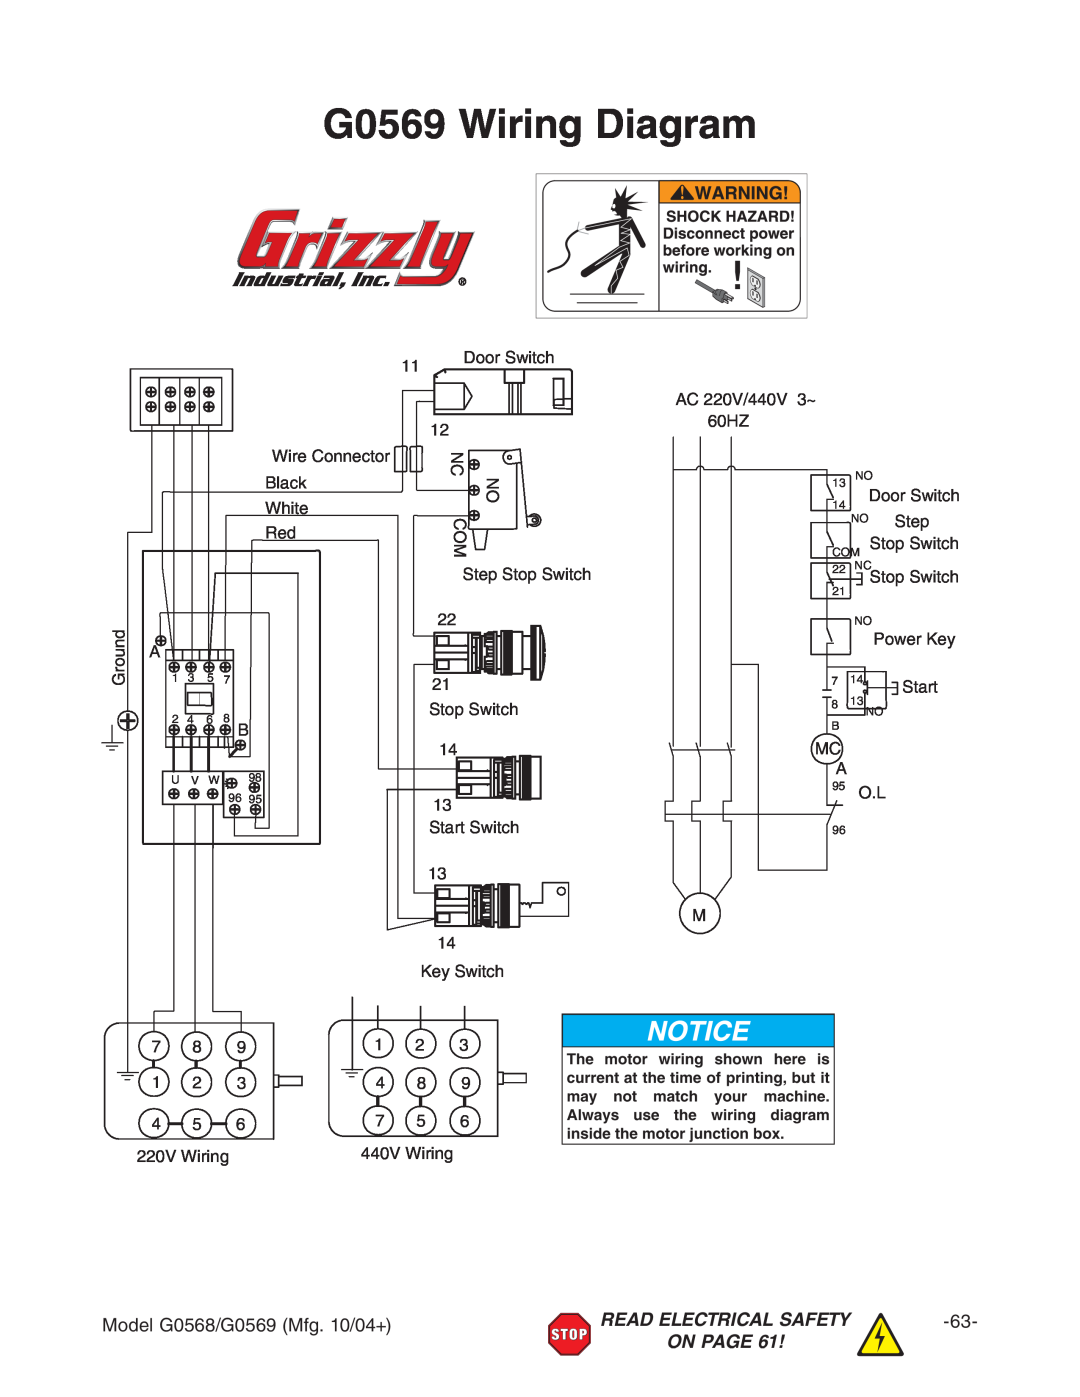 Grizzly G0568 G0569 Wiring Diagram, BdYZa%*+-$%*+.B\#&%$% , Read Electrical Safety, On Page, The motor wiring, shown 